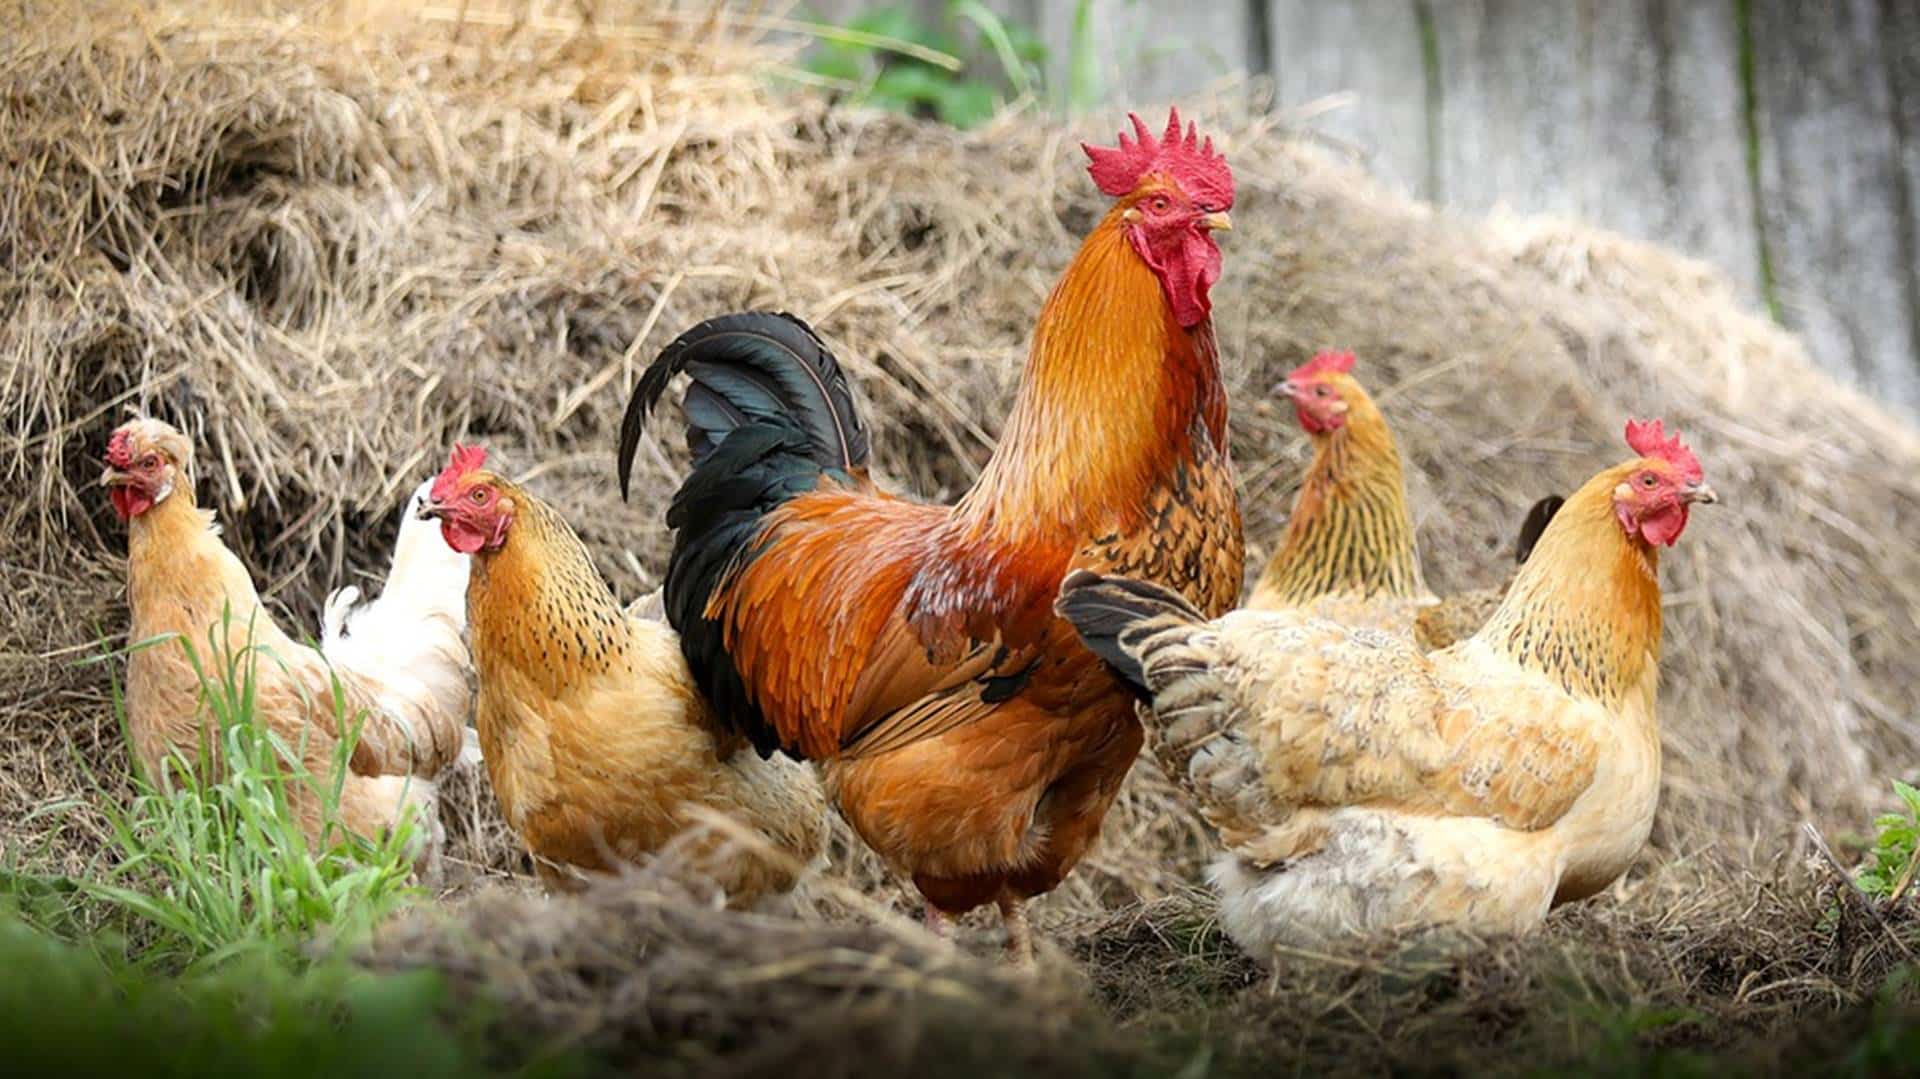 Kerala vet doc gets patent for biodiesel from chicken waste